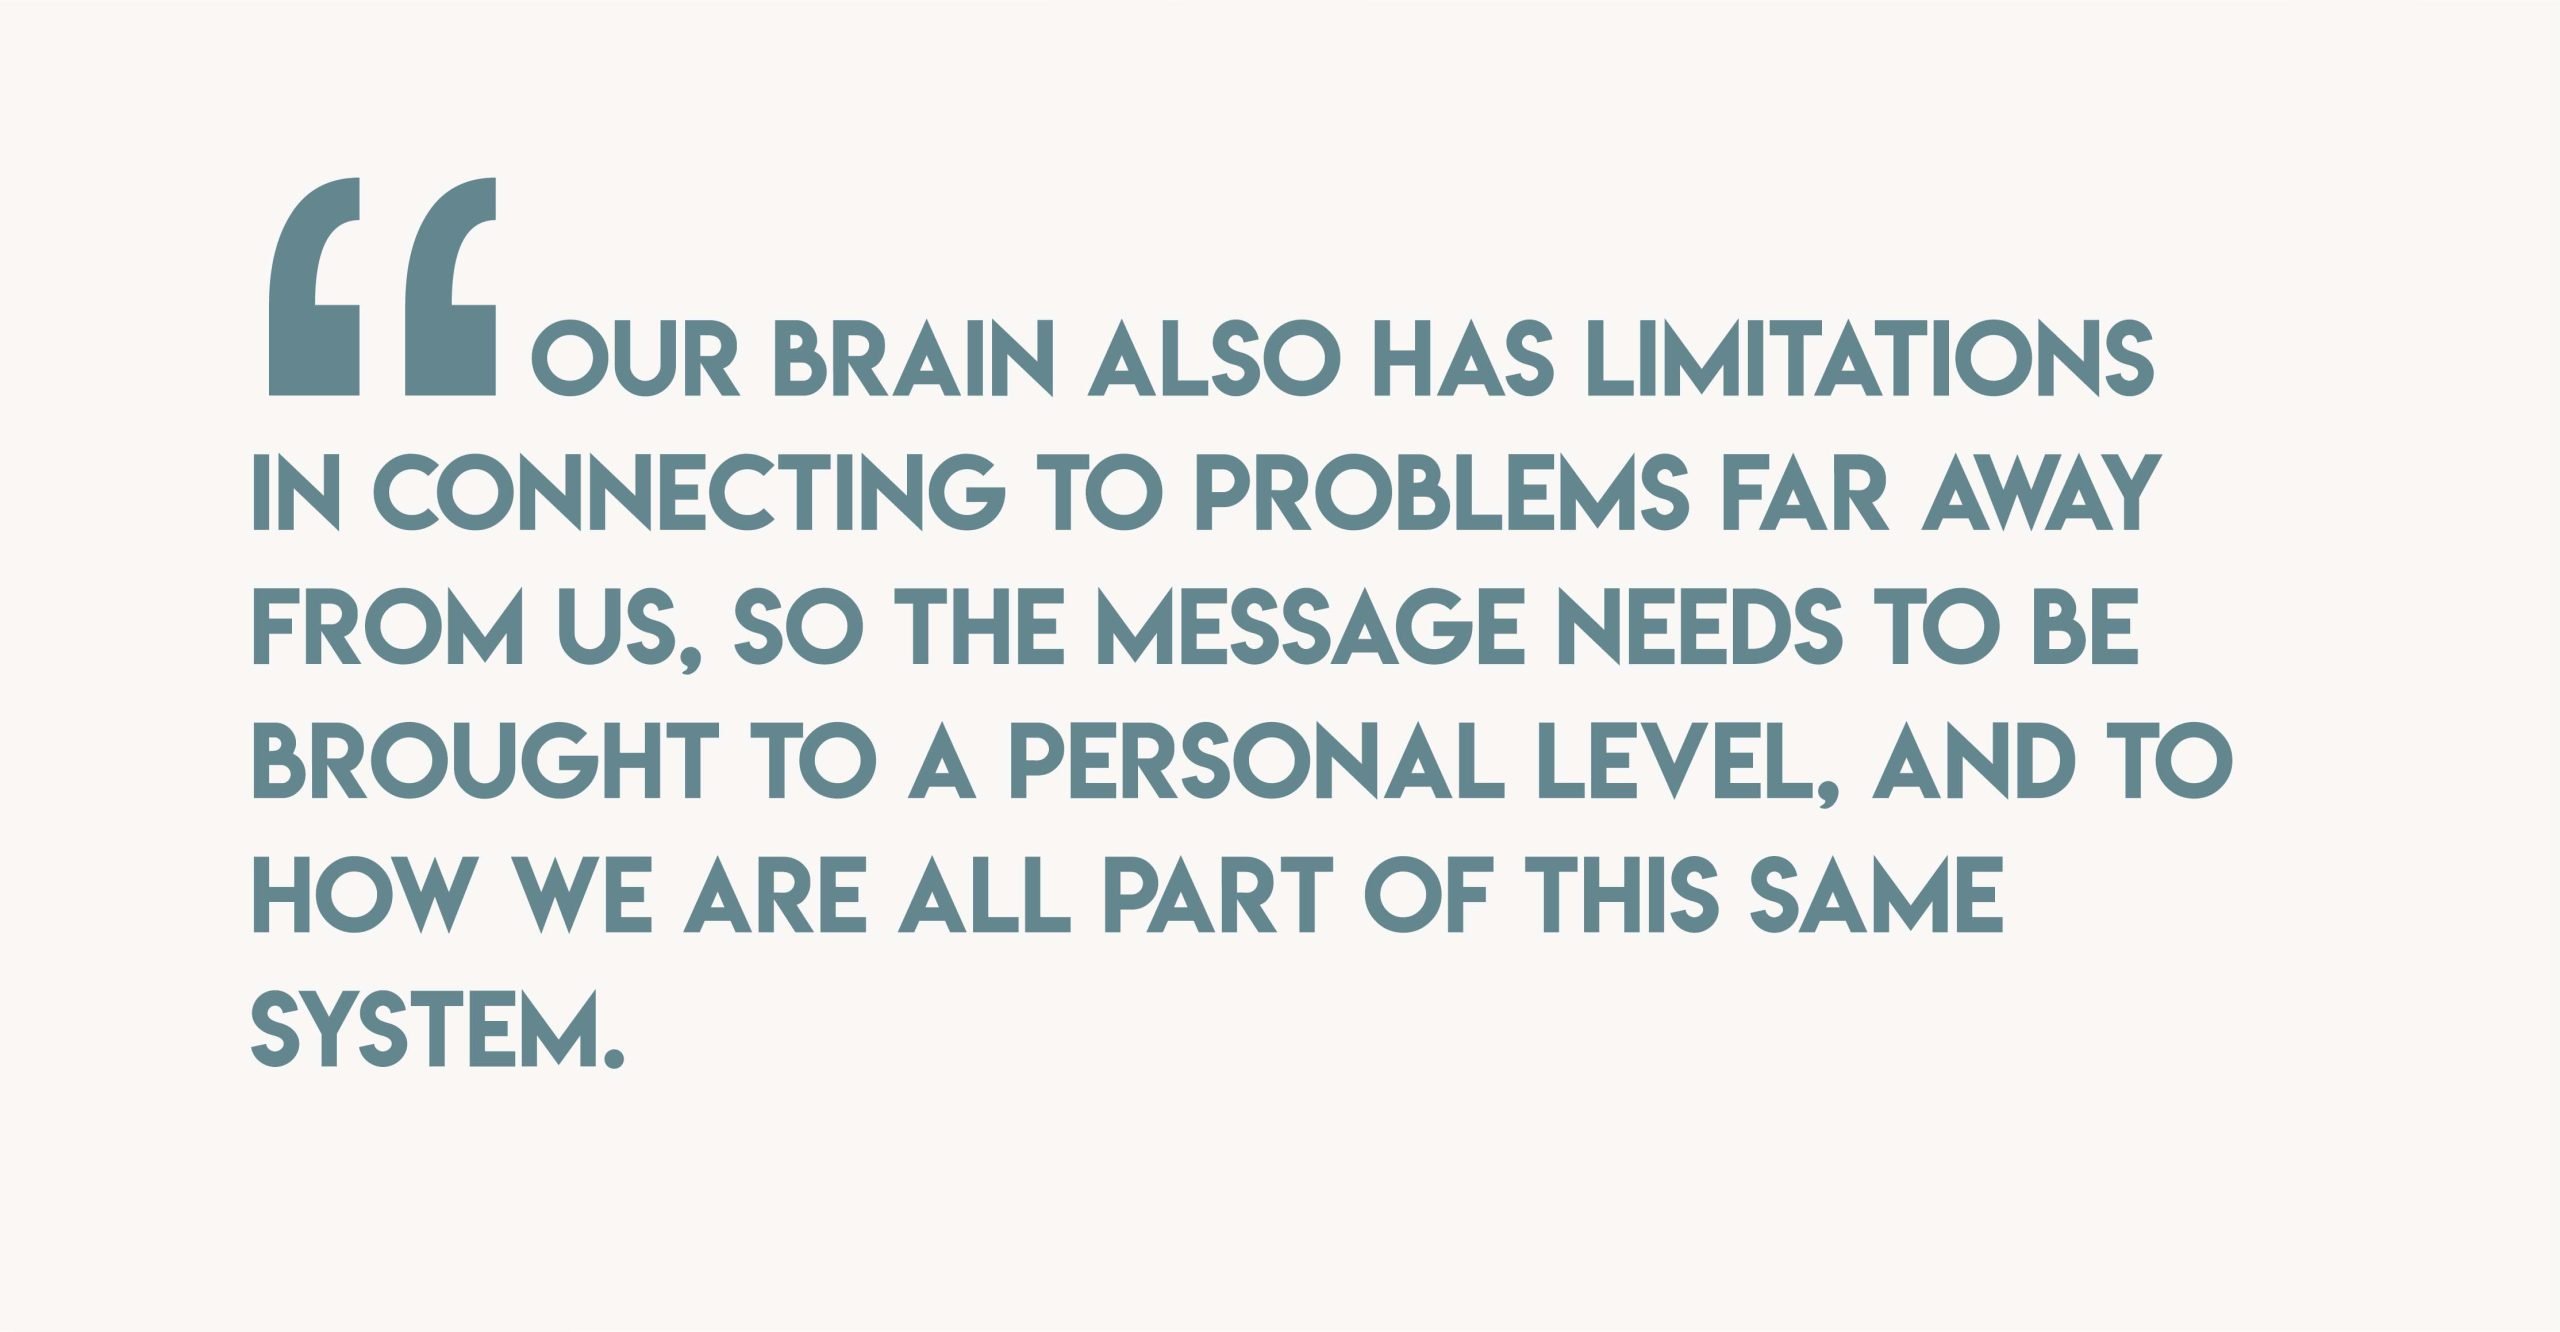 Quote by Claudia Tridapalli, Our brain also has limitations in connecting to problems far away from us, so the message needs to be brought to a personal level, and to how we are all part of this same system